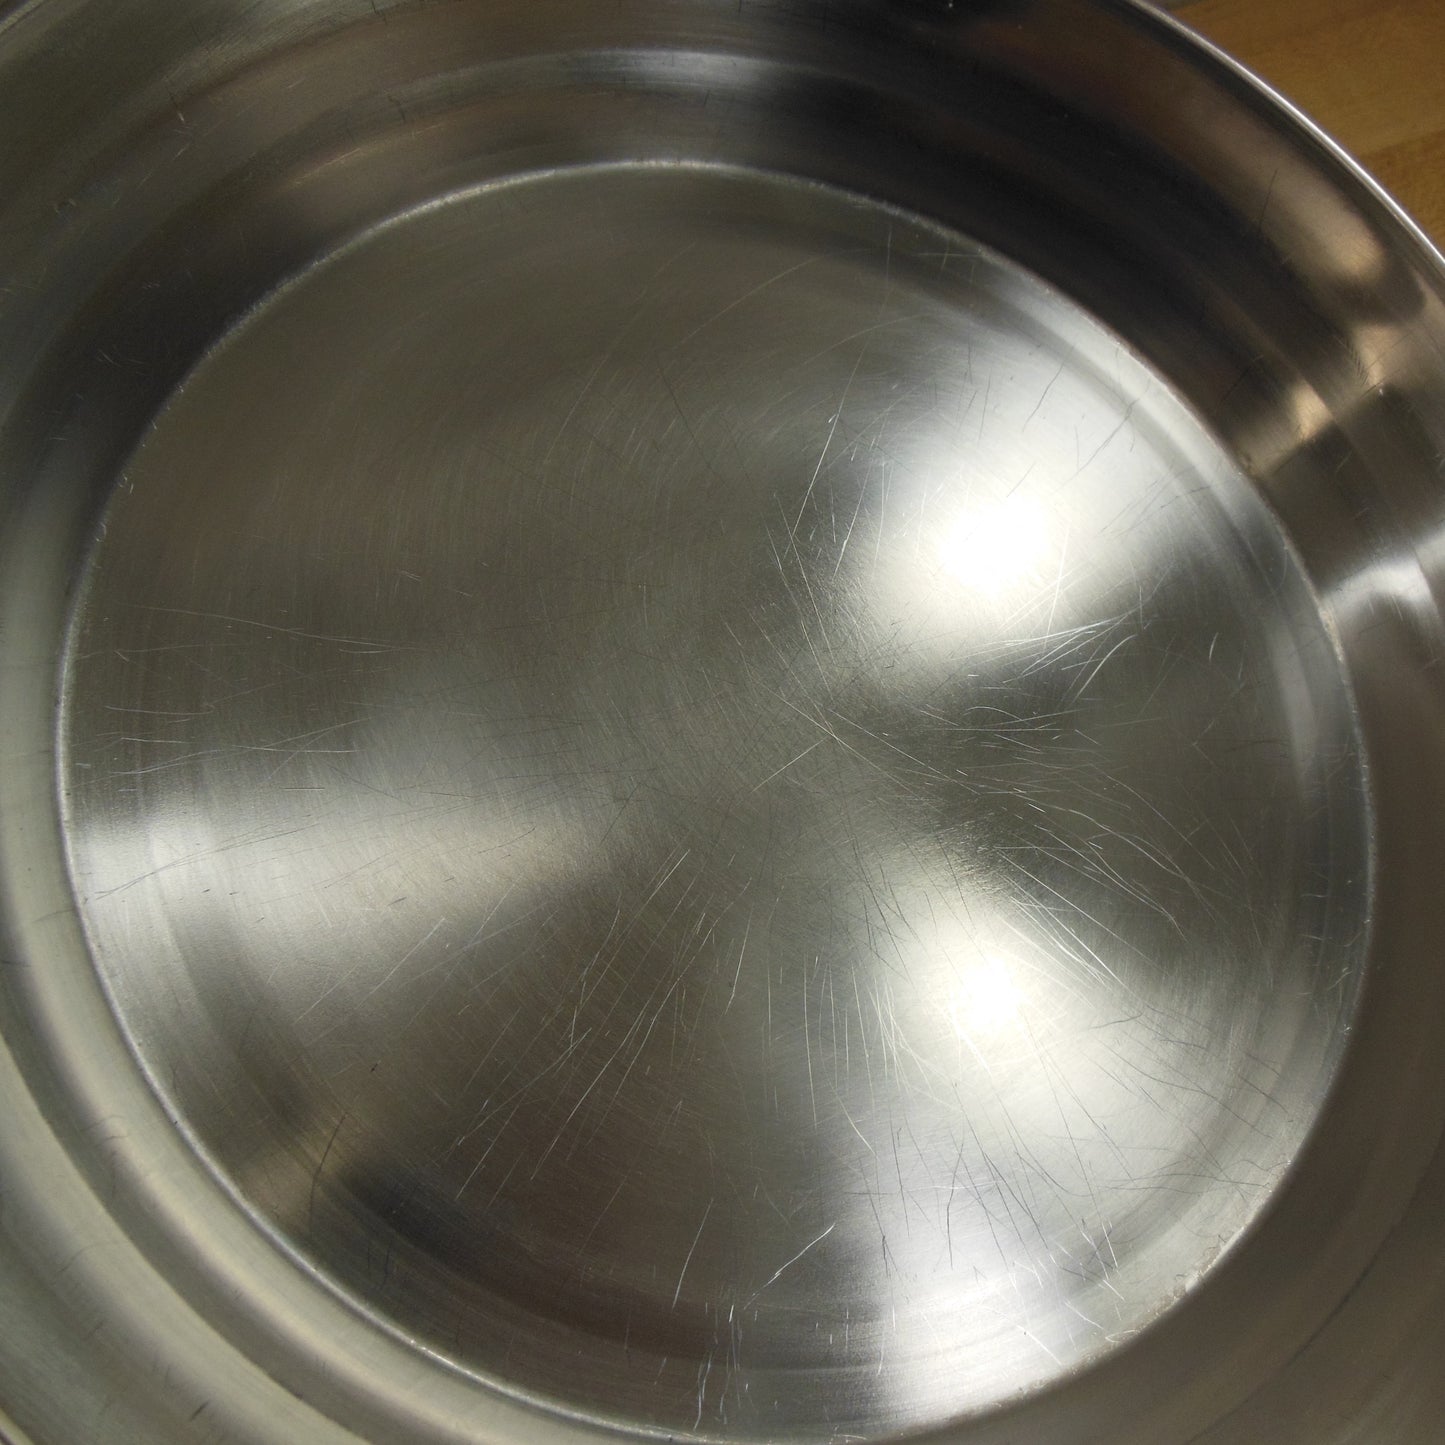 Dietary Products Japan 18-8 Insulated Stainless Steel 9" Pie Pan Dish used